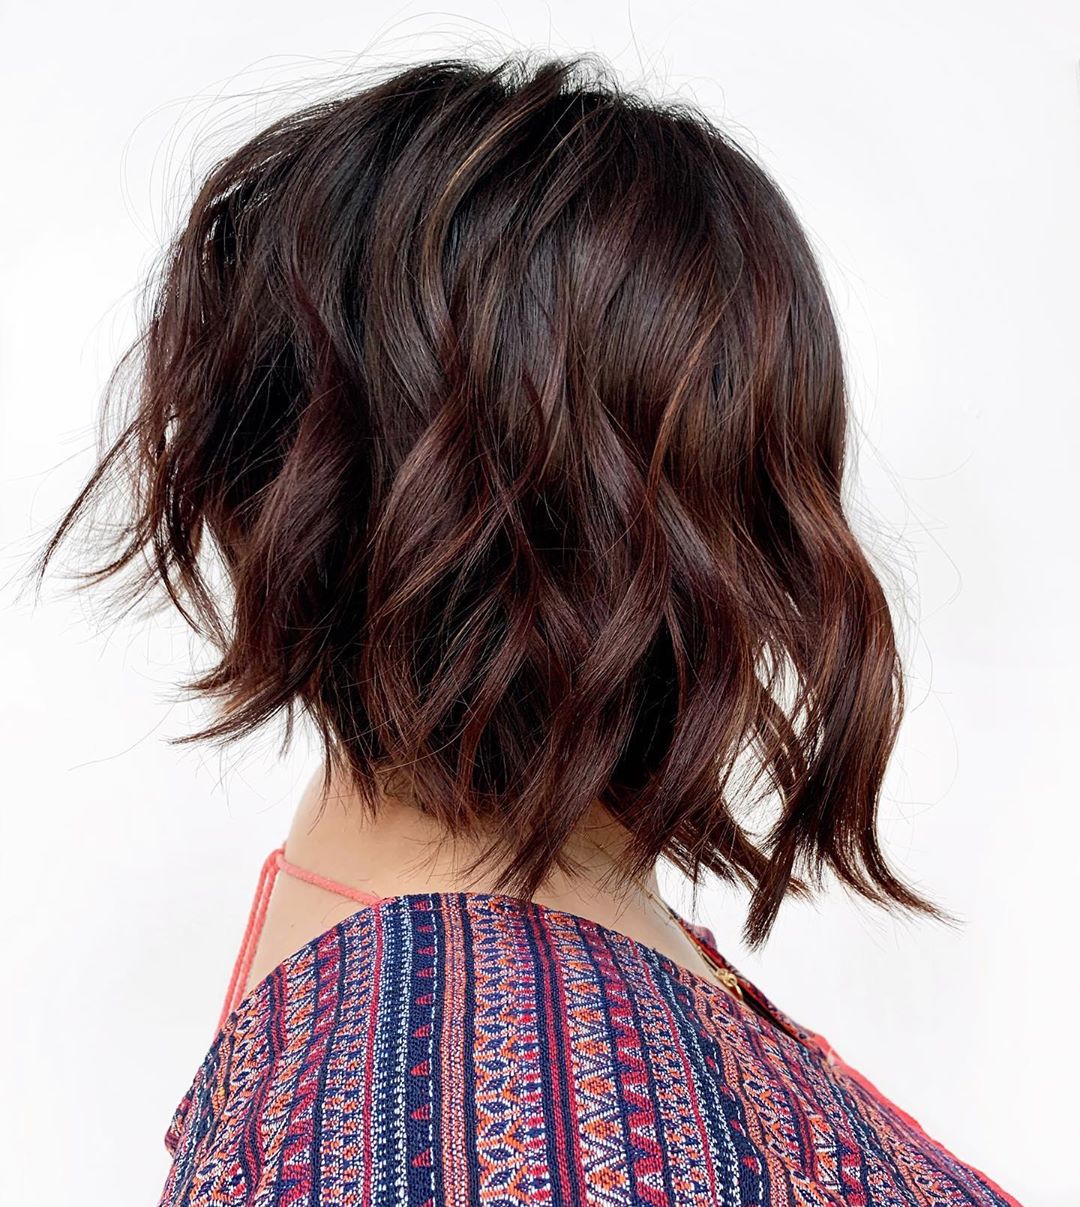 Shoulder-length haircuts for wavy and curly hair: 14 interesting examples